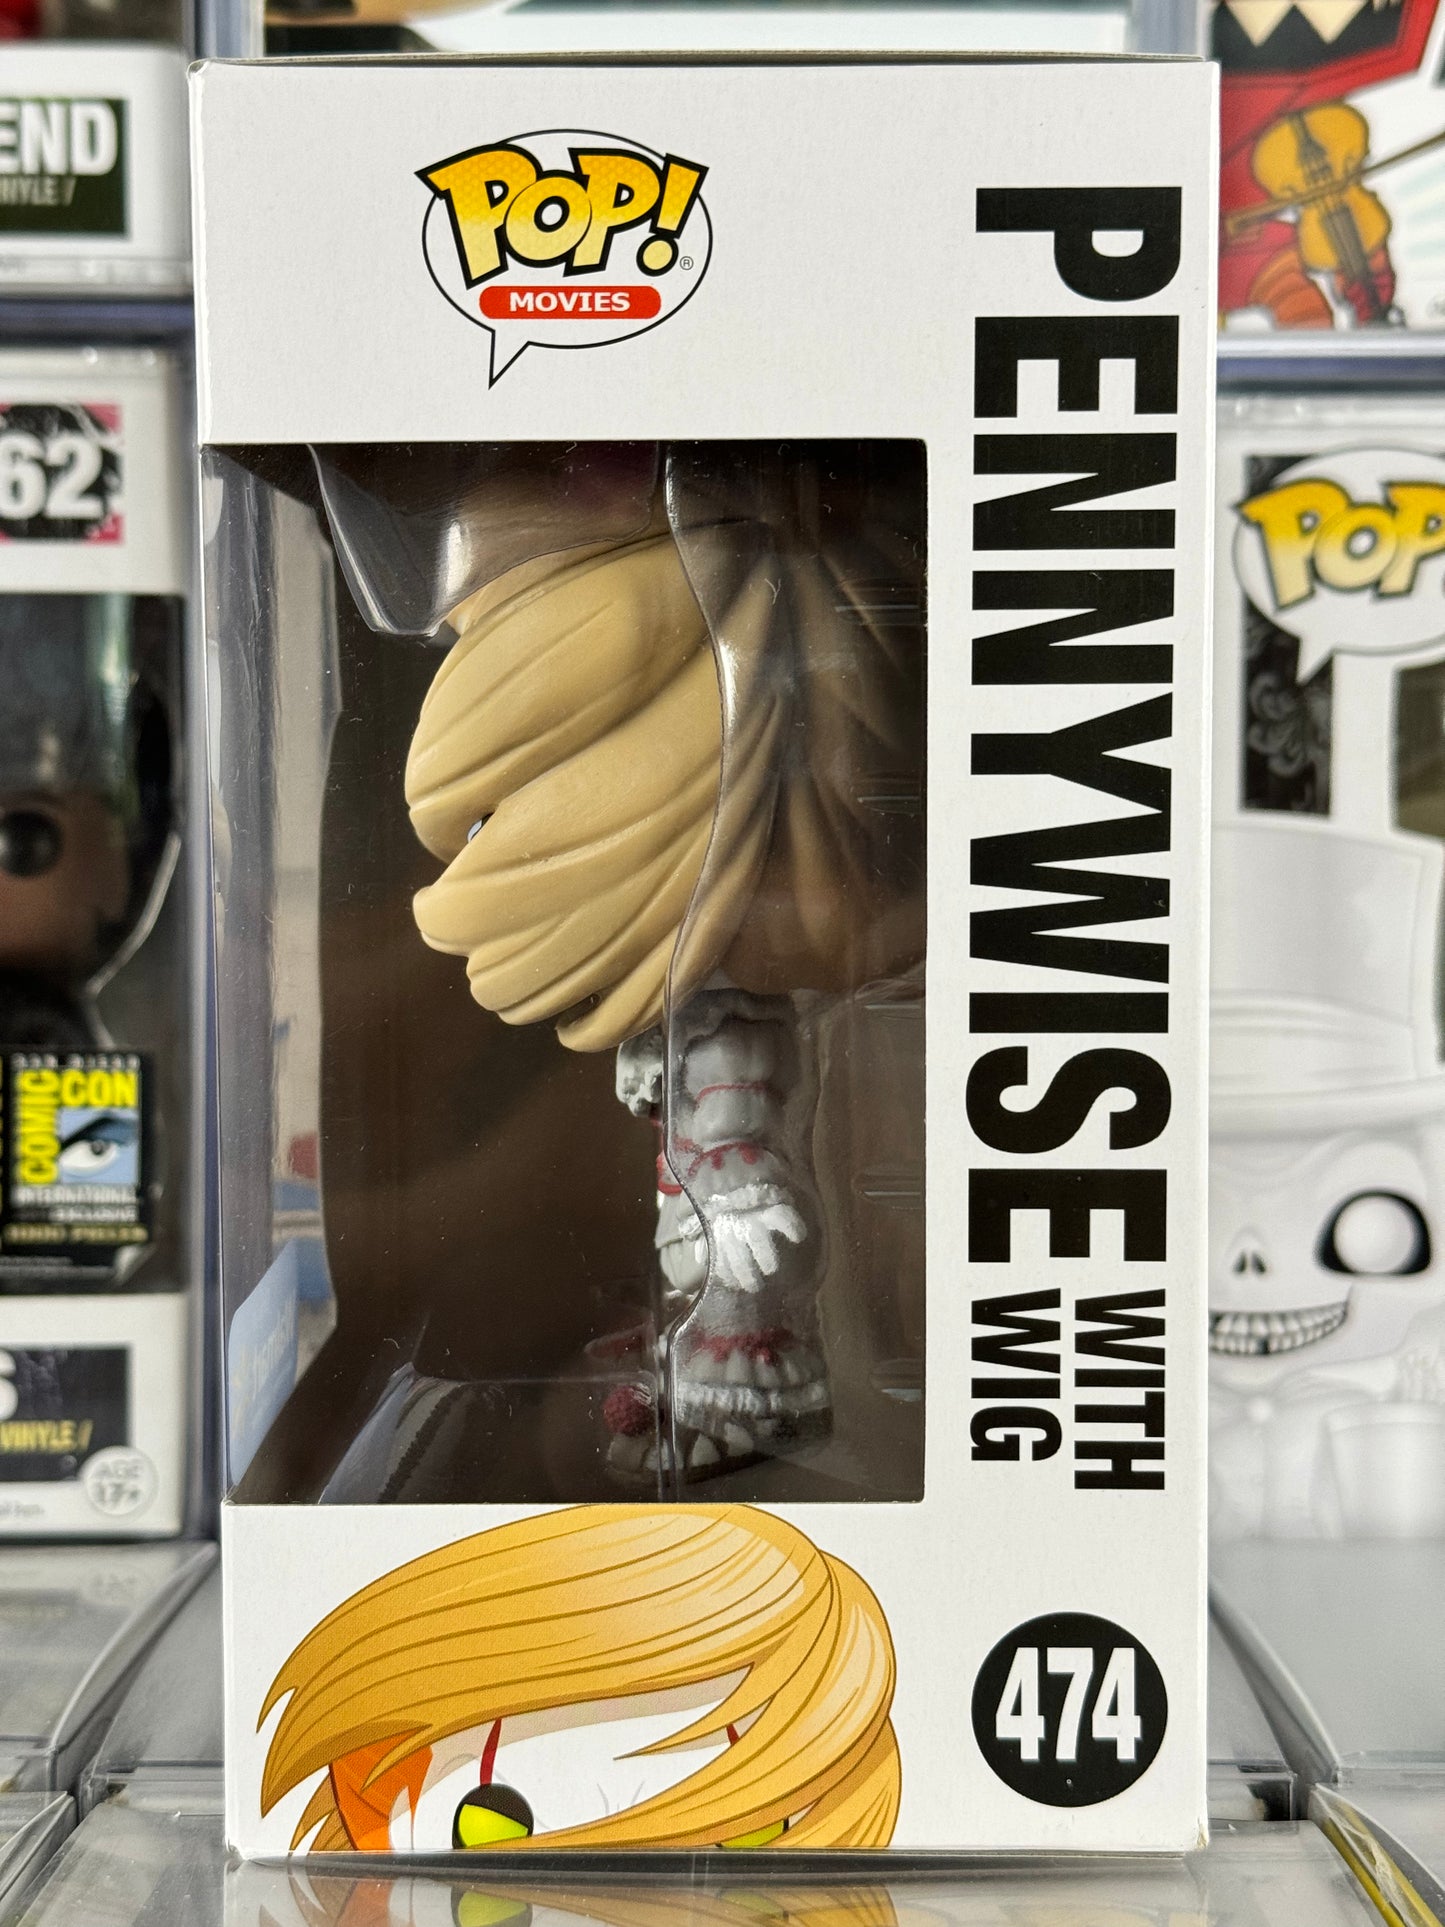 It - Pennywise (w/ Wig) (474) Vaulted Walmart Exclusive